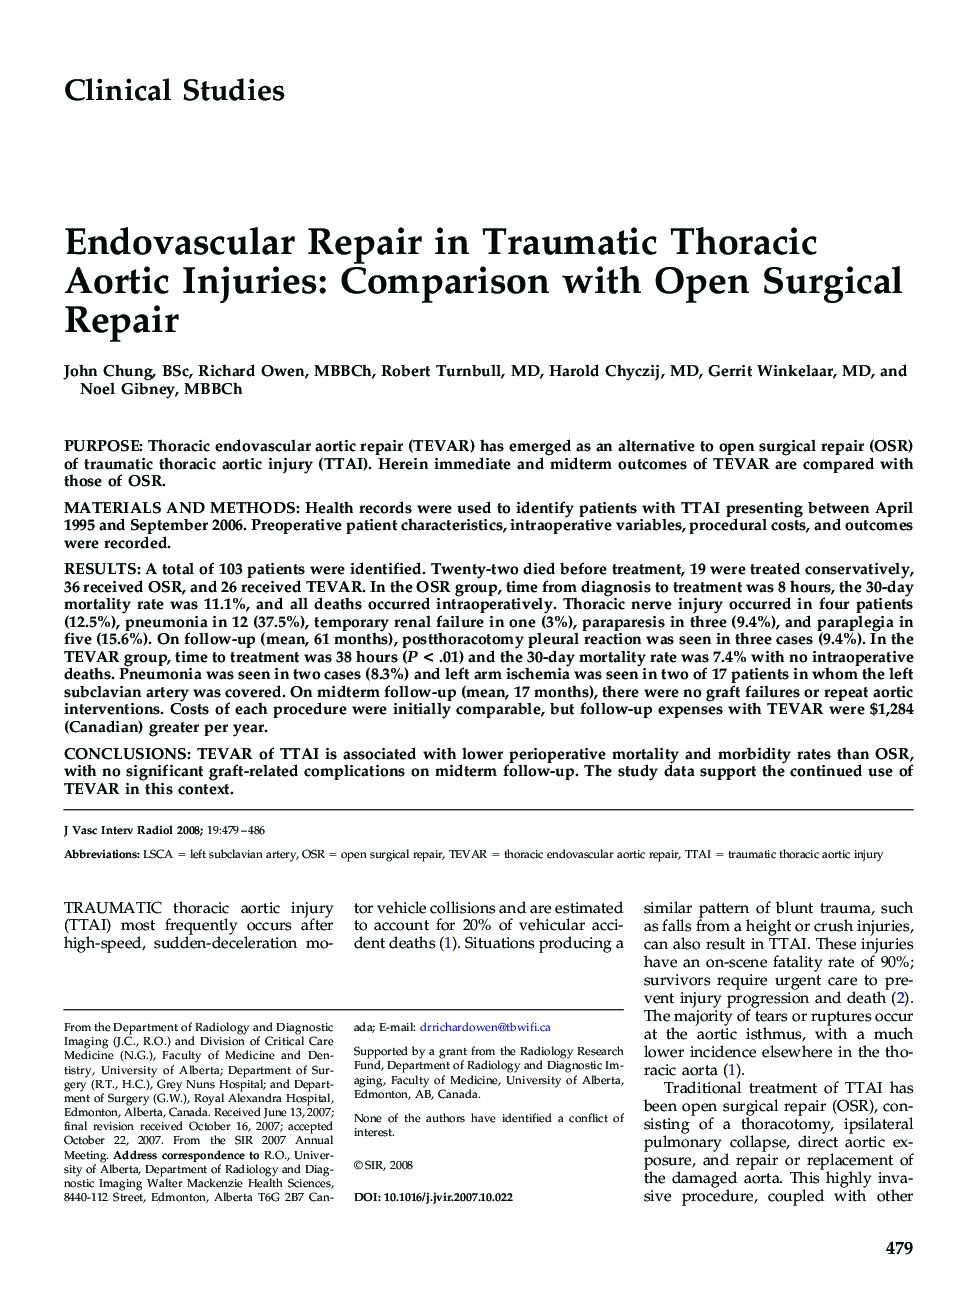 Endovascular Repair in Traumatic Thoracic Aortic Injuries: Comparison with Open Surgical Repair